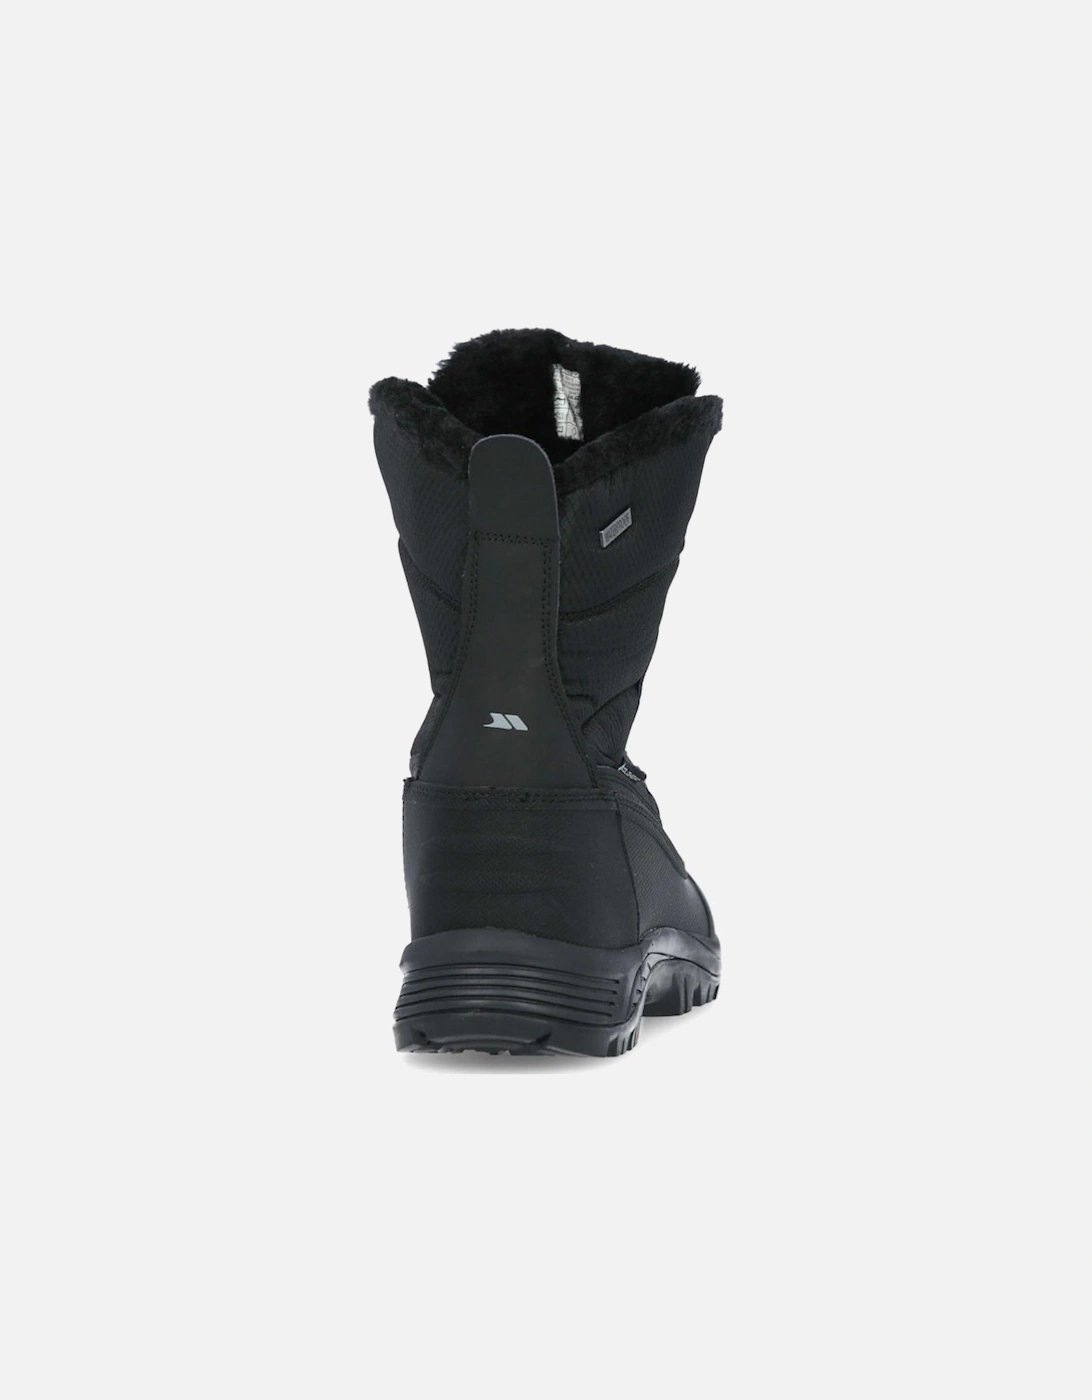 Mens Negev II Leather Snow Boots